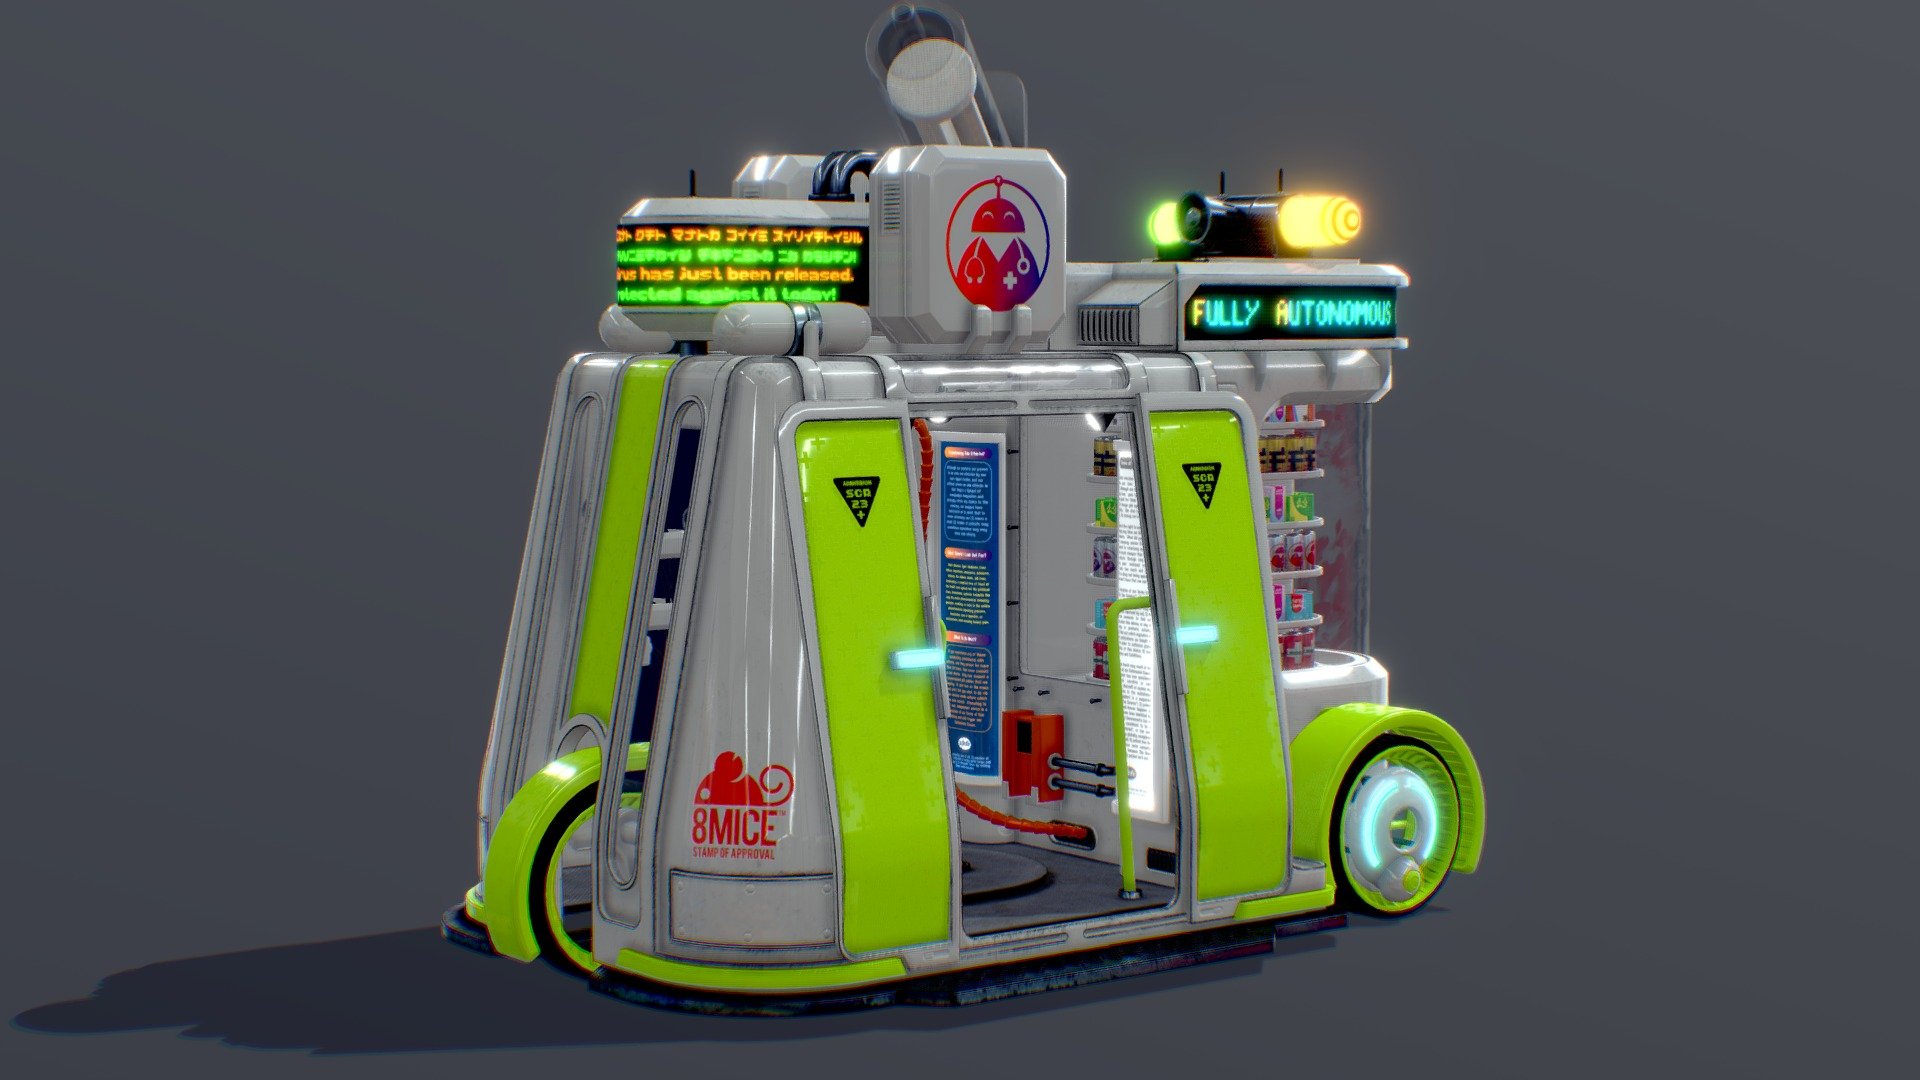 Not just an ambulance:  part vending machine, part futuristic mobile hospital capable of carrying out emergency surgeries anywhere it goes.  Just don't break the rules! - Autonomous Mobile Sci-Fi Hospital - 3D model by se7en23 3d model